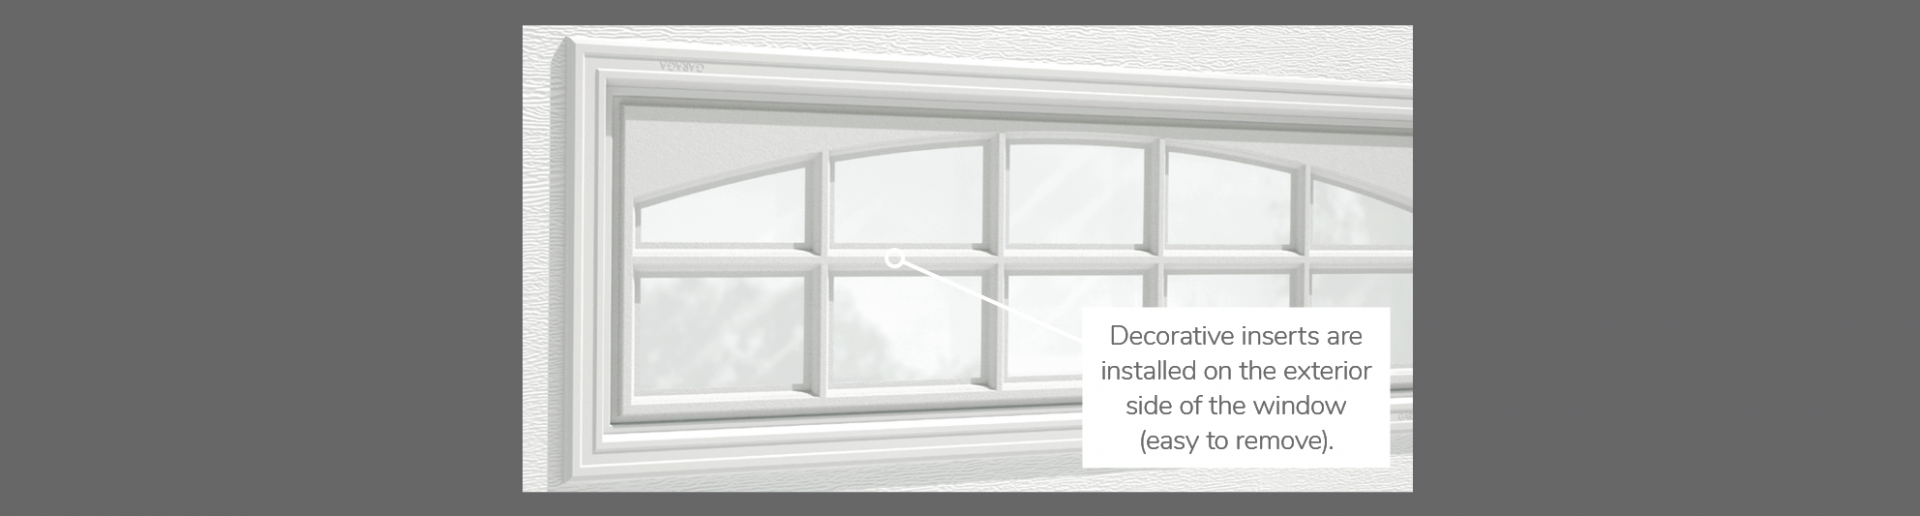 Cascade Decorative Insert, 40" x 13", available for door R-16, R-12, 2 layers - Polystyrene and Non-insulated